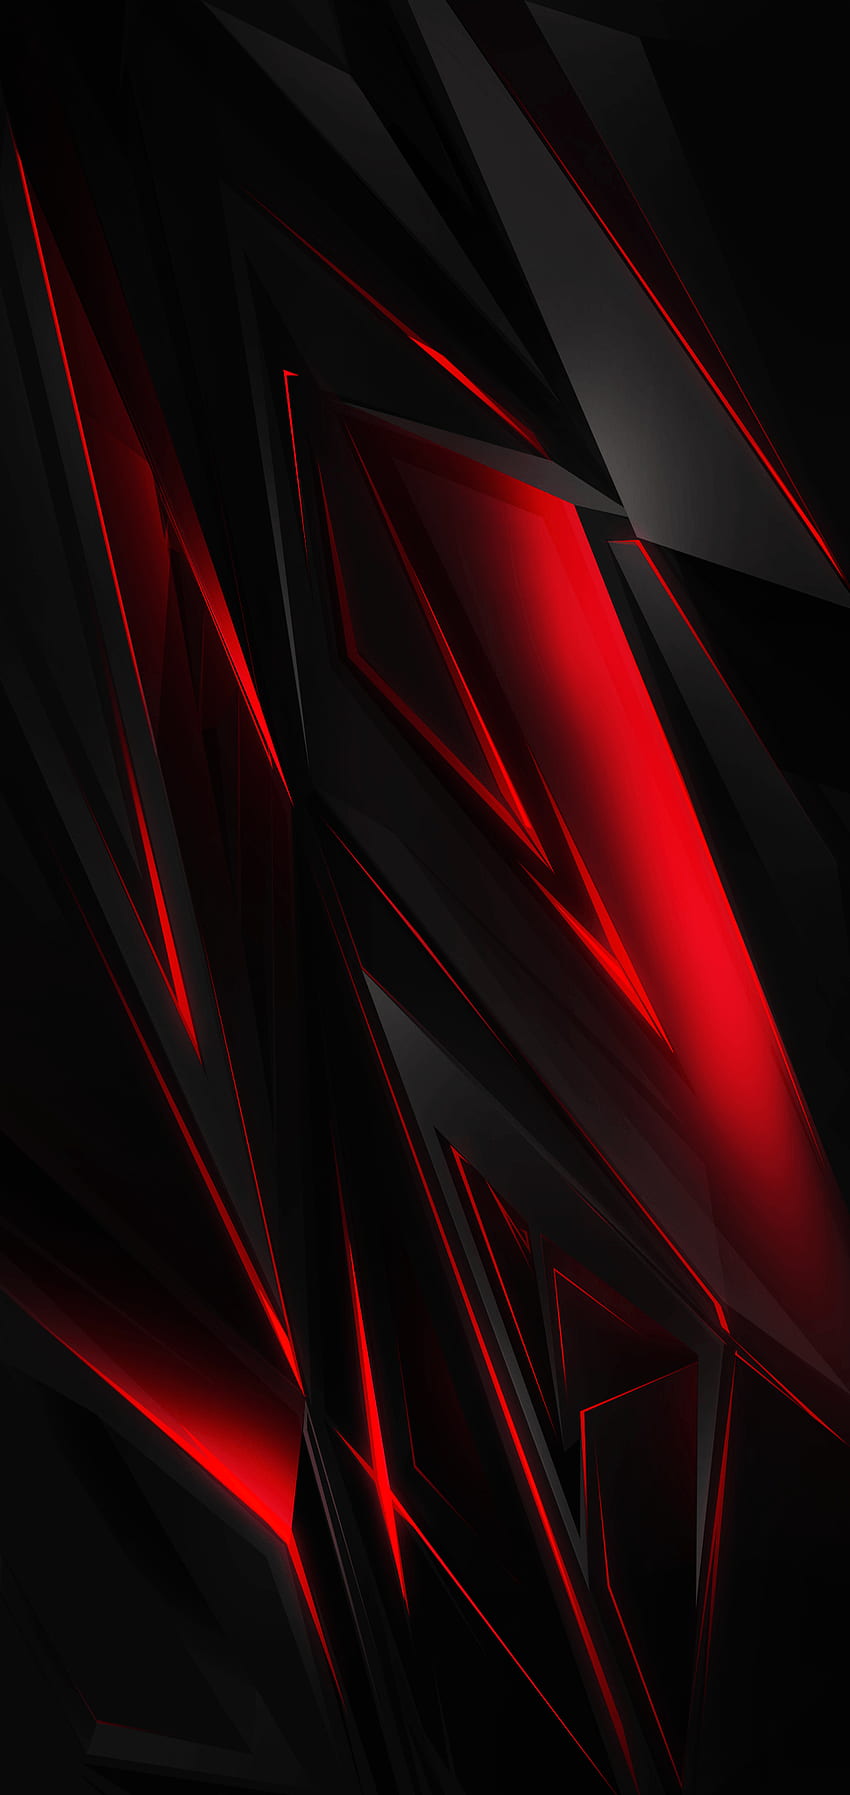 AMOLED Black and red abstract - I didn't make this, but I formatted it to fit the screen of a OnePlus 6 - : Mobile HD phone wallpaper